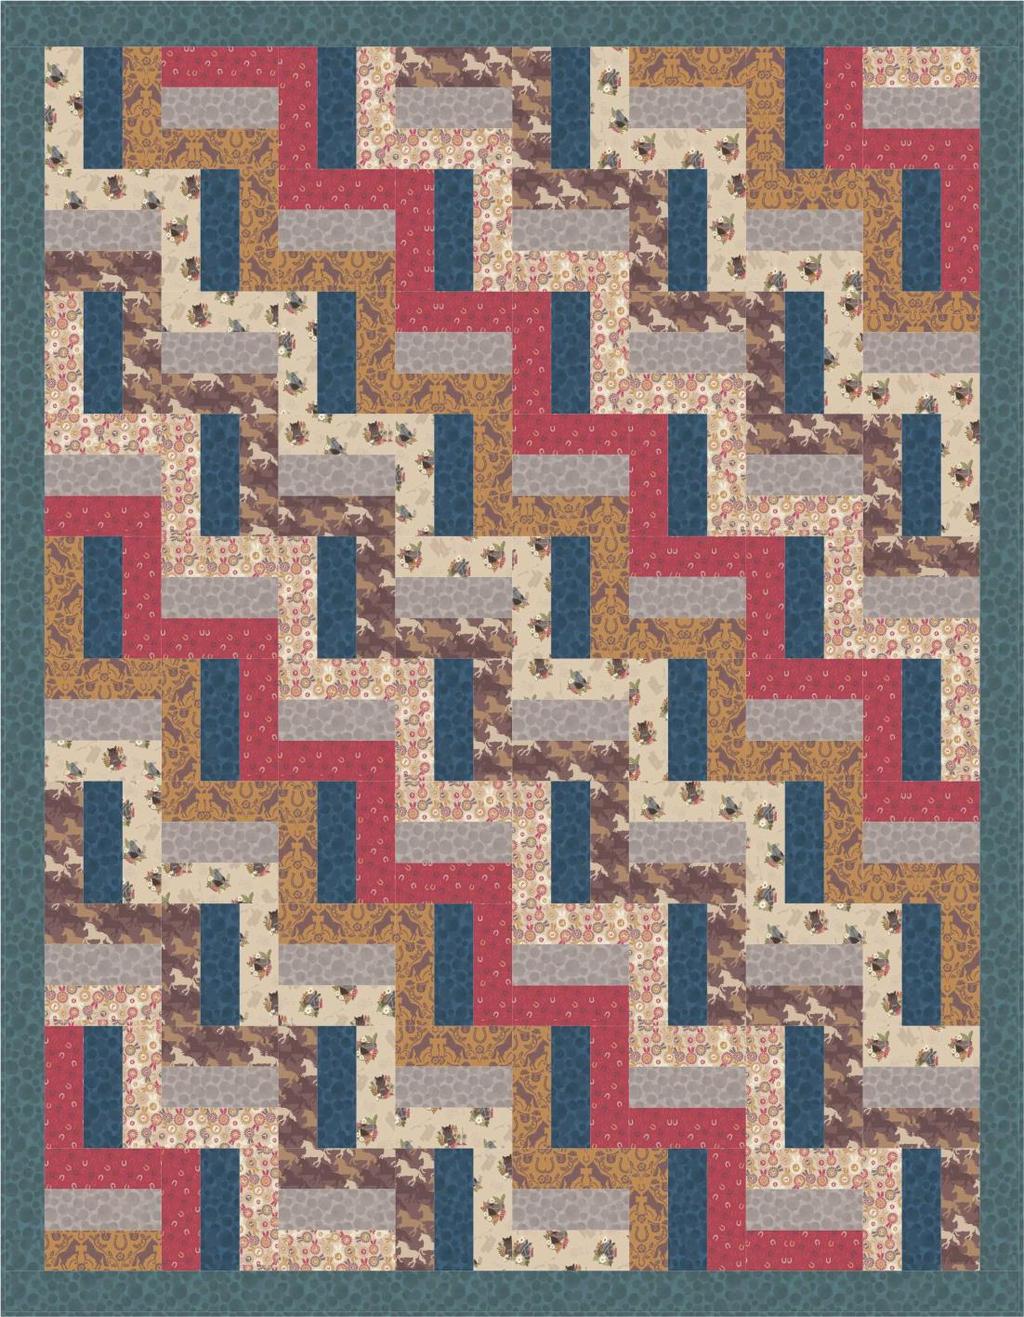 Farley Mount Quilt (Design 3) Designed and made by Sally Ablett Size: 52 x 64 Block Size: 12½ x 12½ QUILT 3 (Main Diagram) FABRIC REQUIREMENTS (Farley Mount Collection) Fabric 1: ½yd - ½mtr - A225.